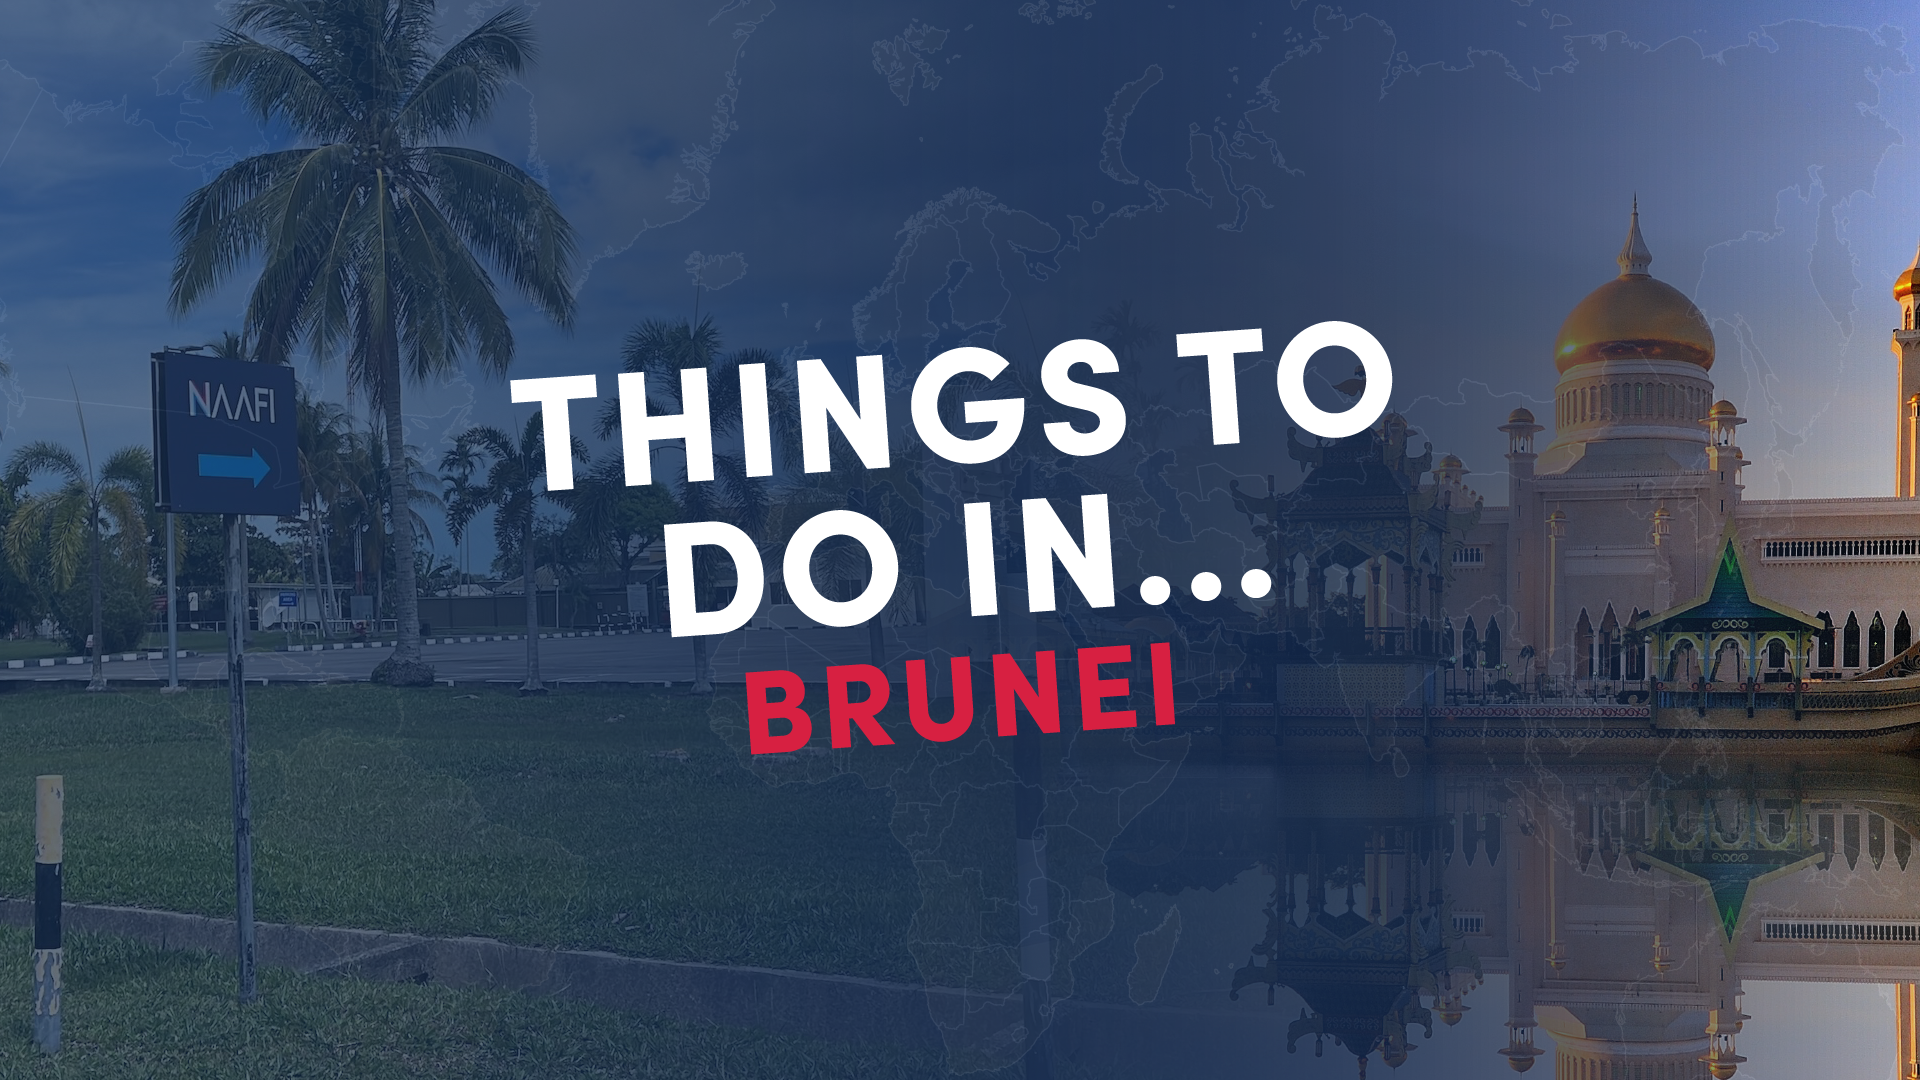 Things to do in Brunei…